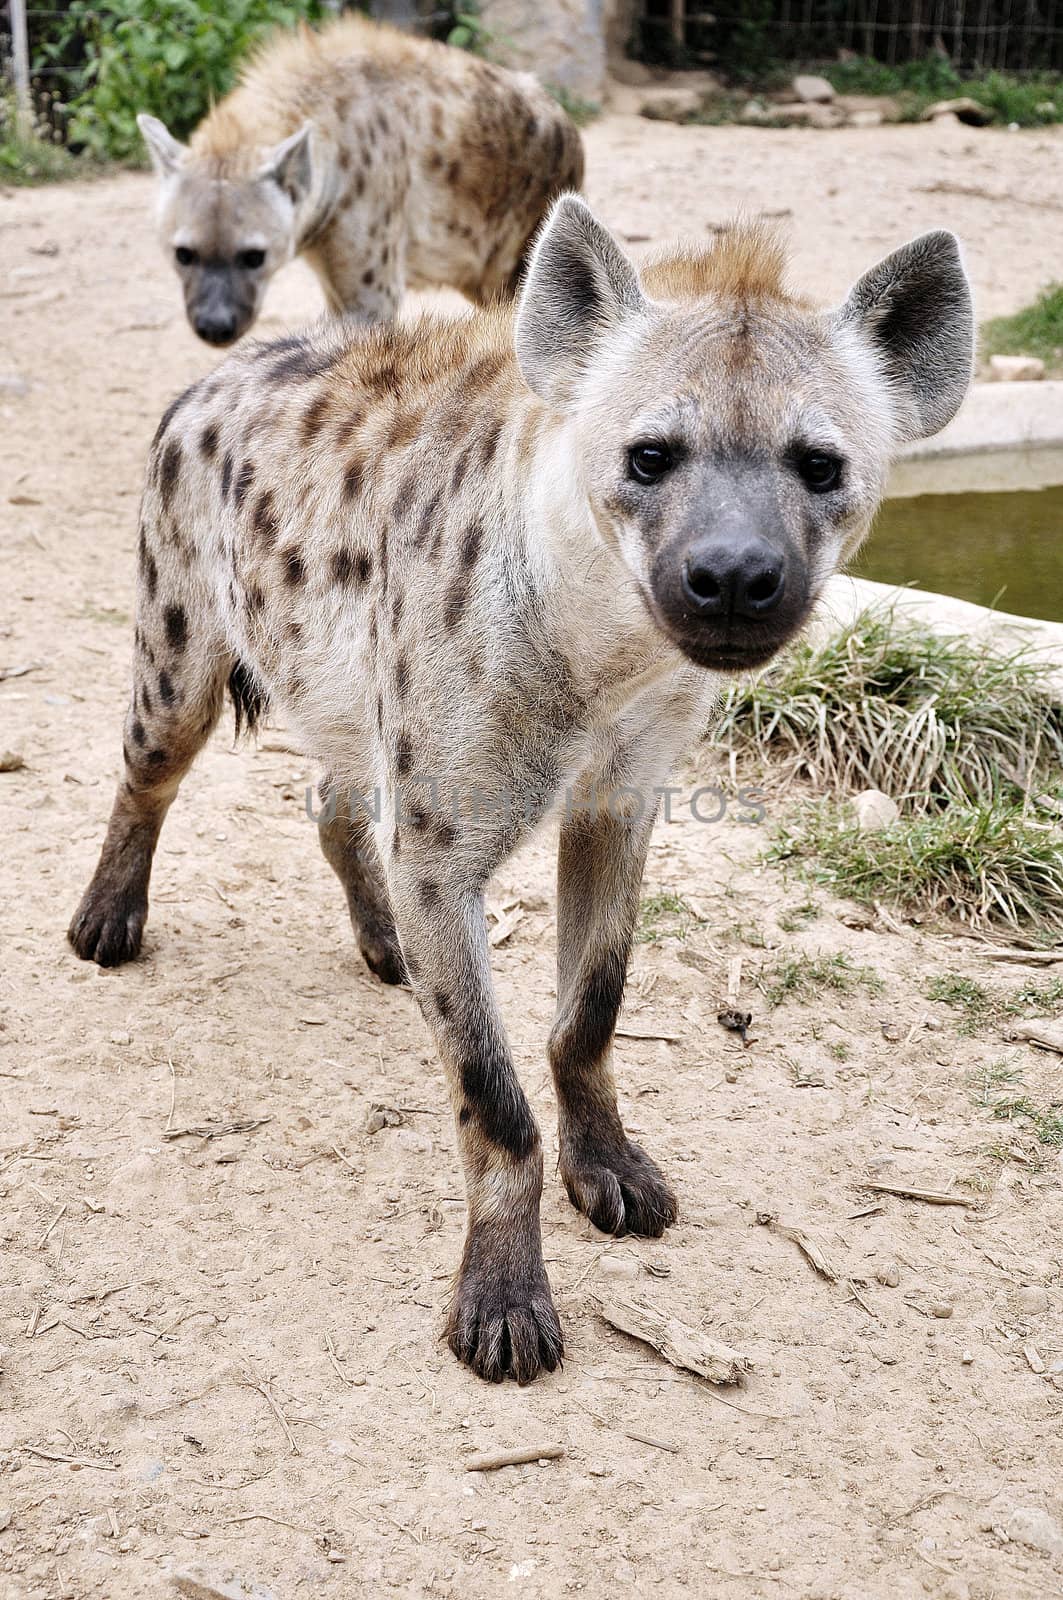 The spotted hyena also known as laughing hyena, is a carnivorous mammal.